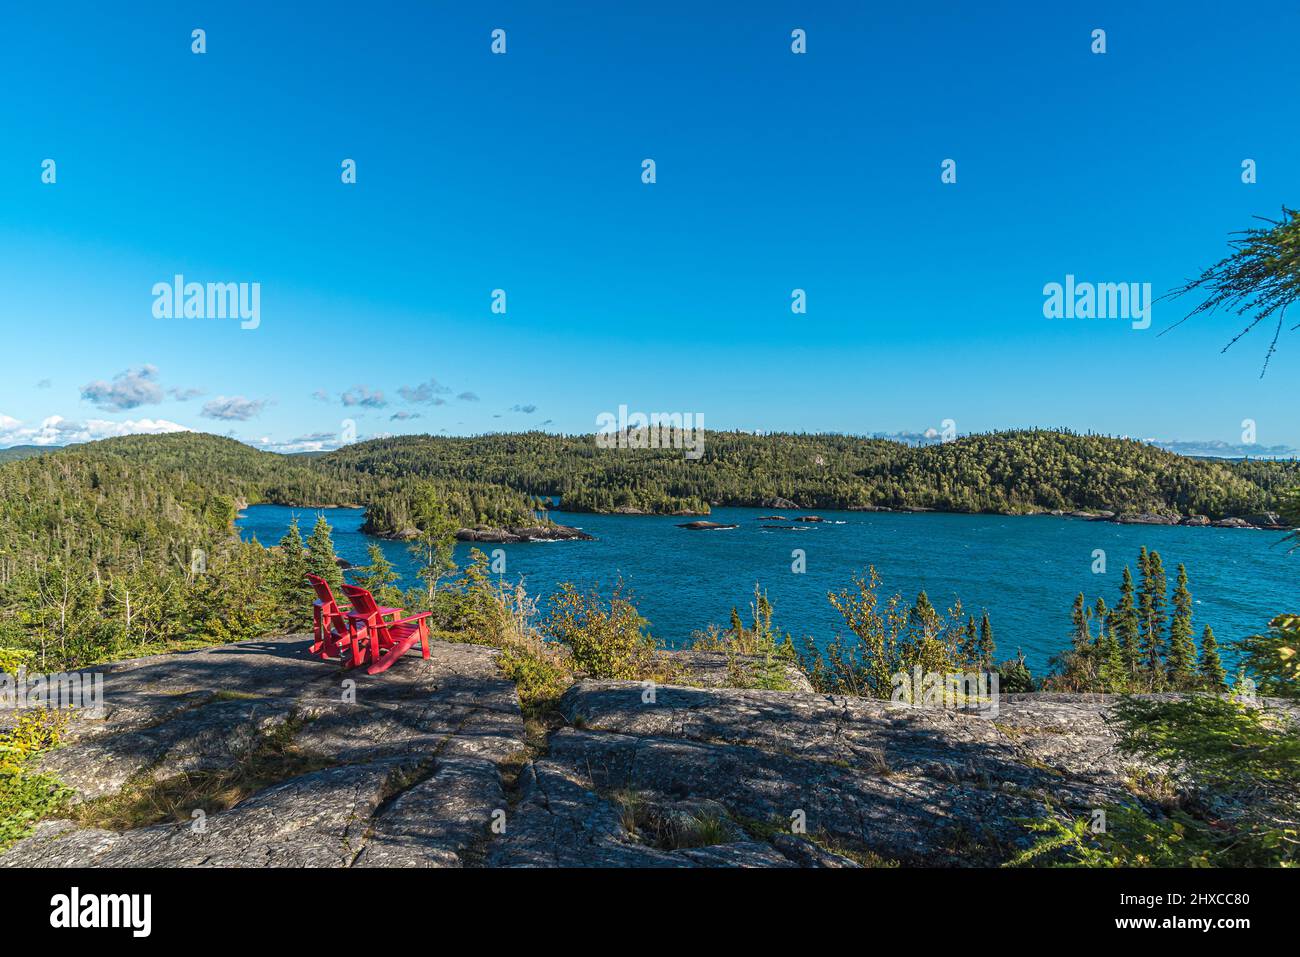 Landscape with forest in Ontario, Pukaskwa National Park. Canada. Stock Photo